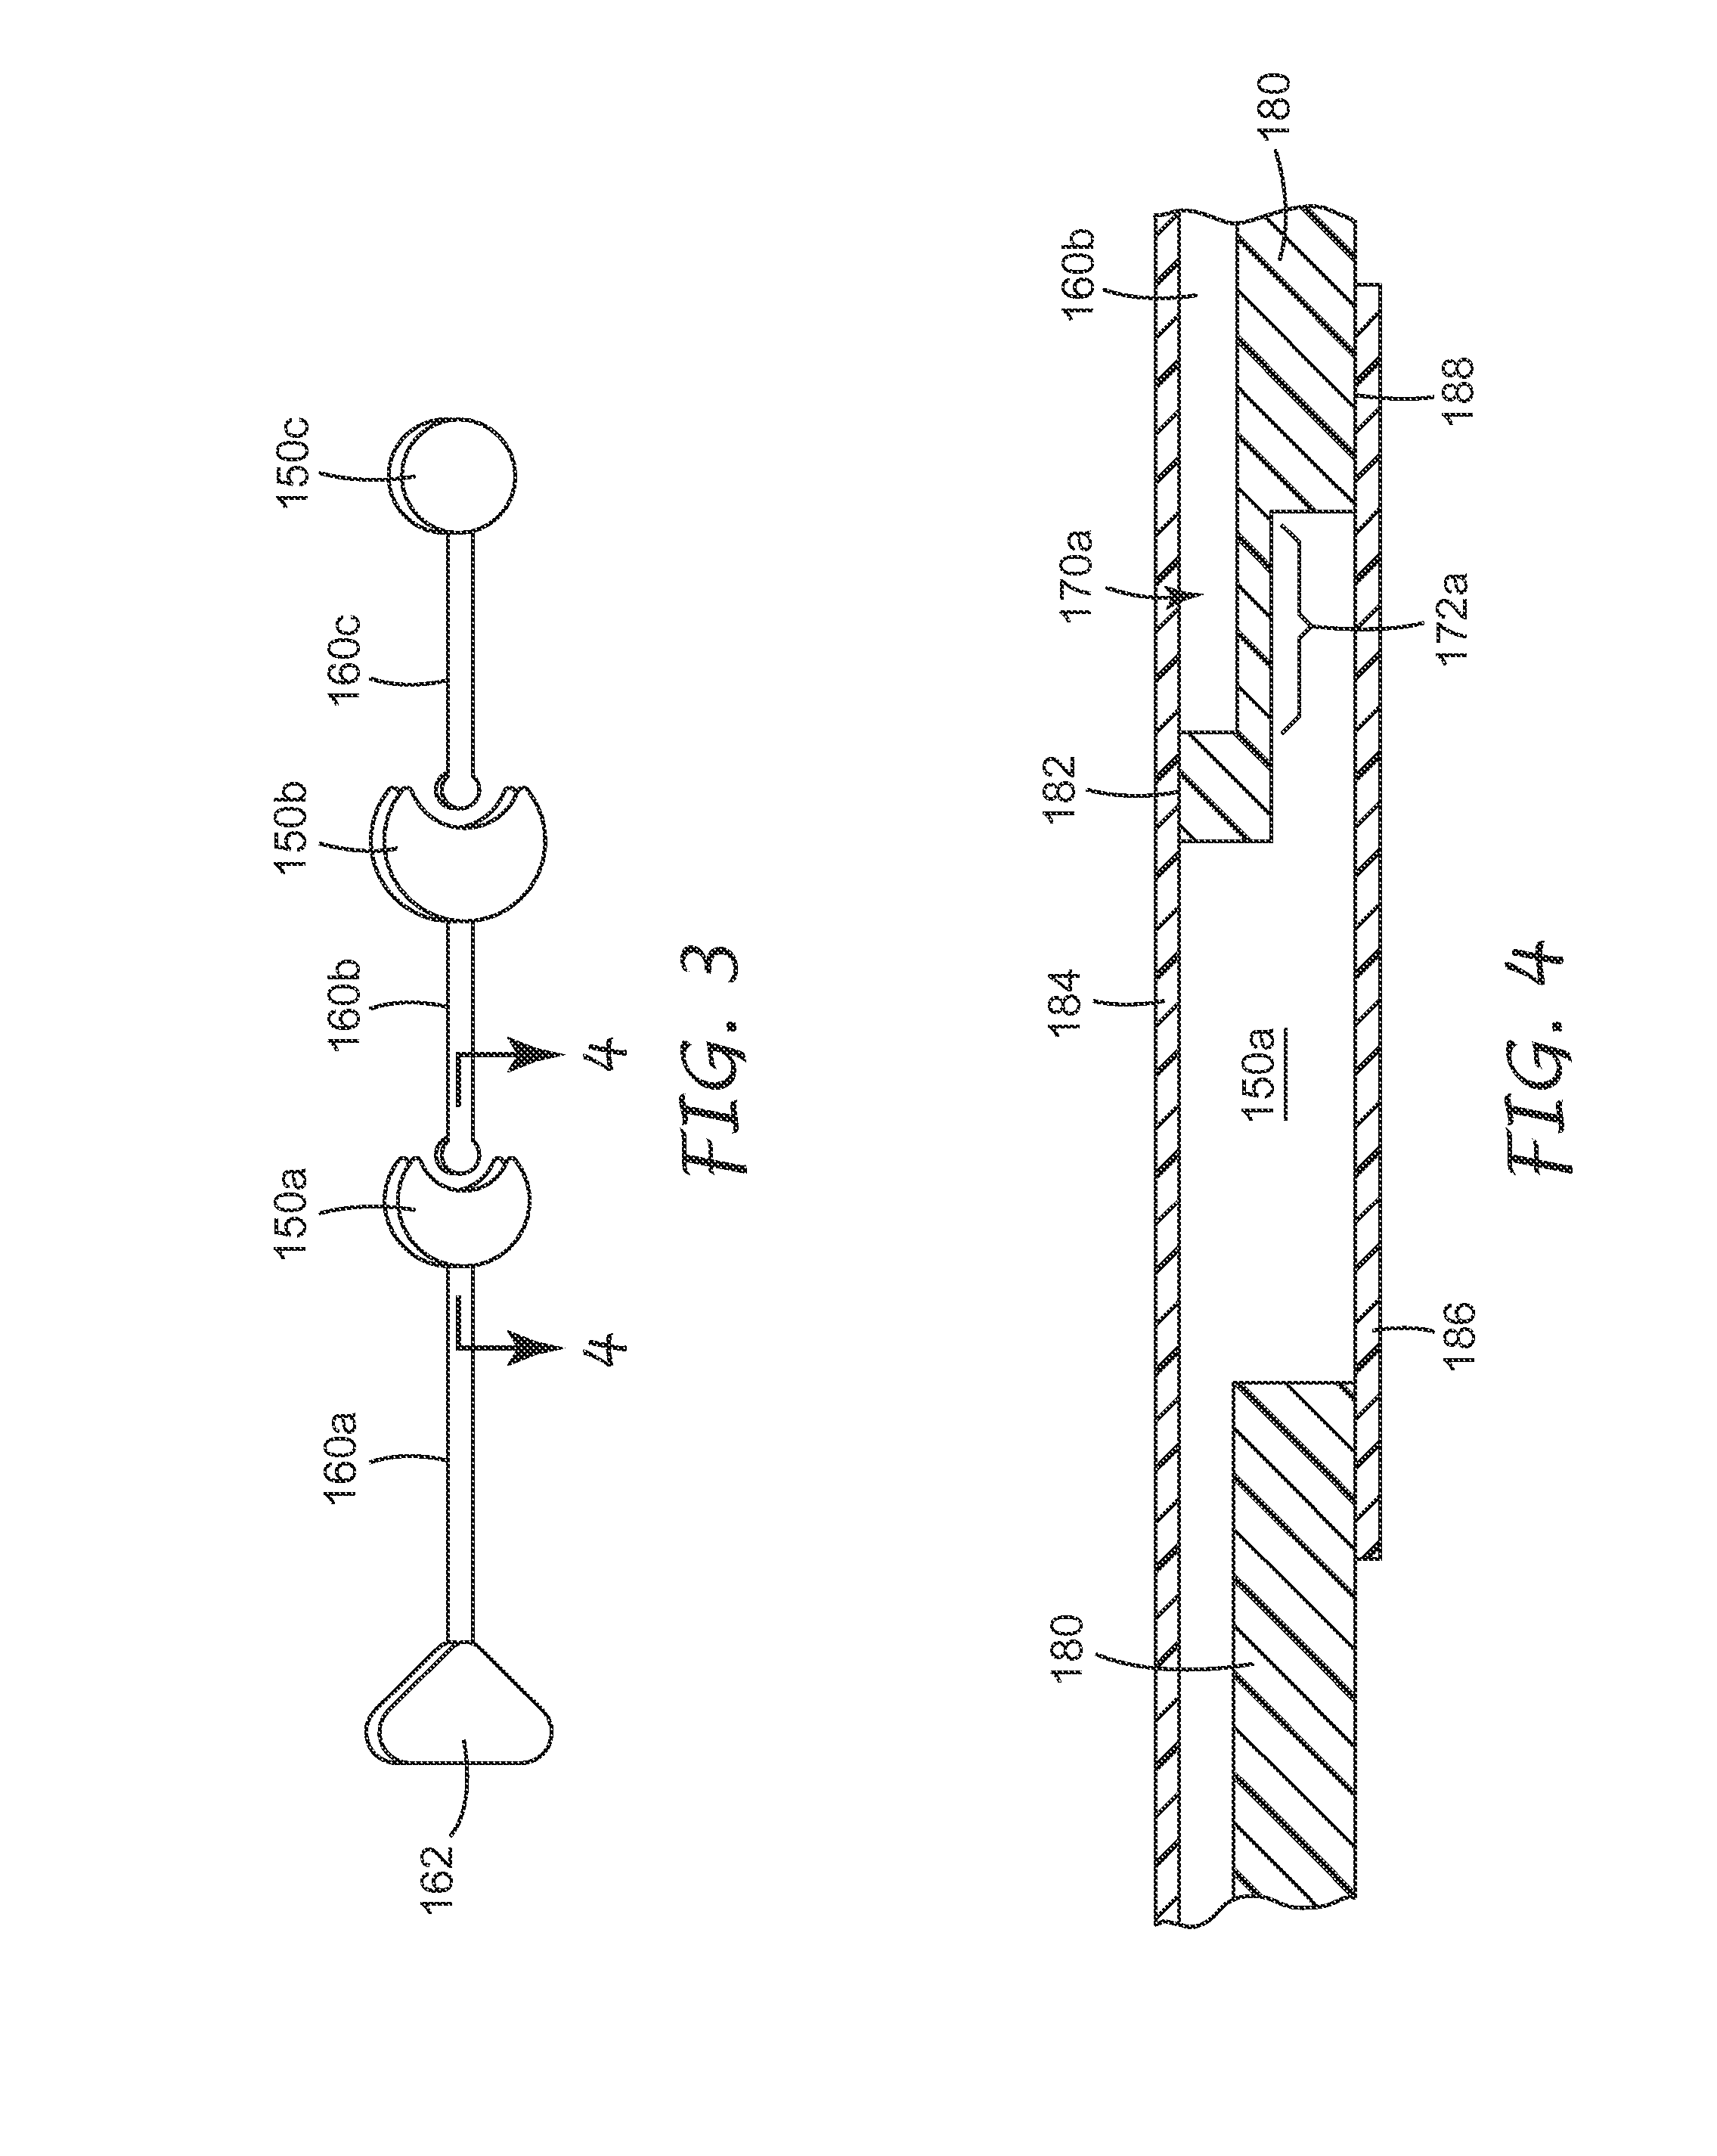 Methods and devices for removal of organic molecules from biological mixtures using a hydrophilic solid support in a hydrophobic matrix